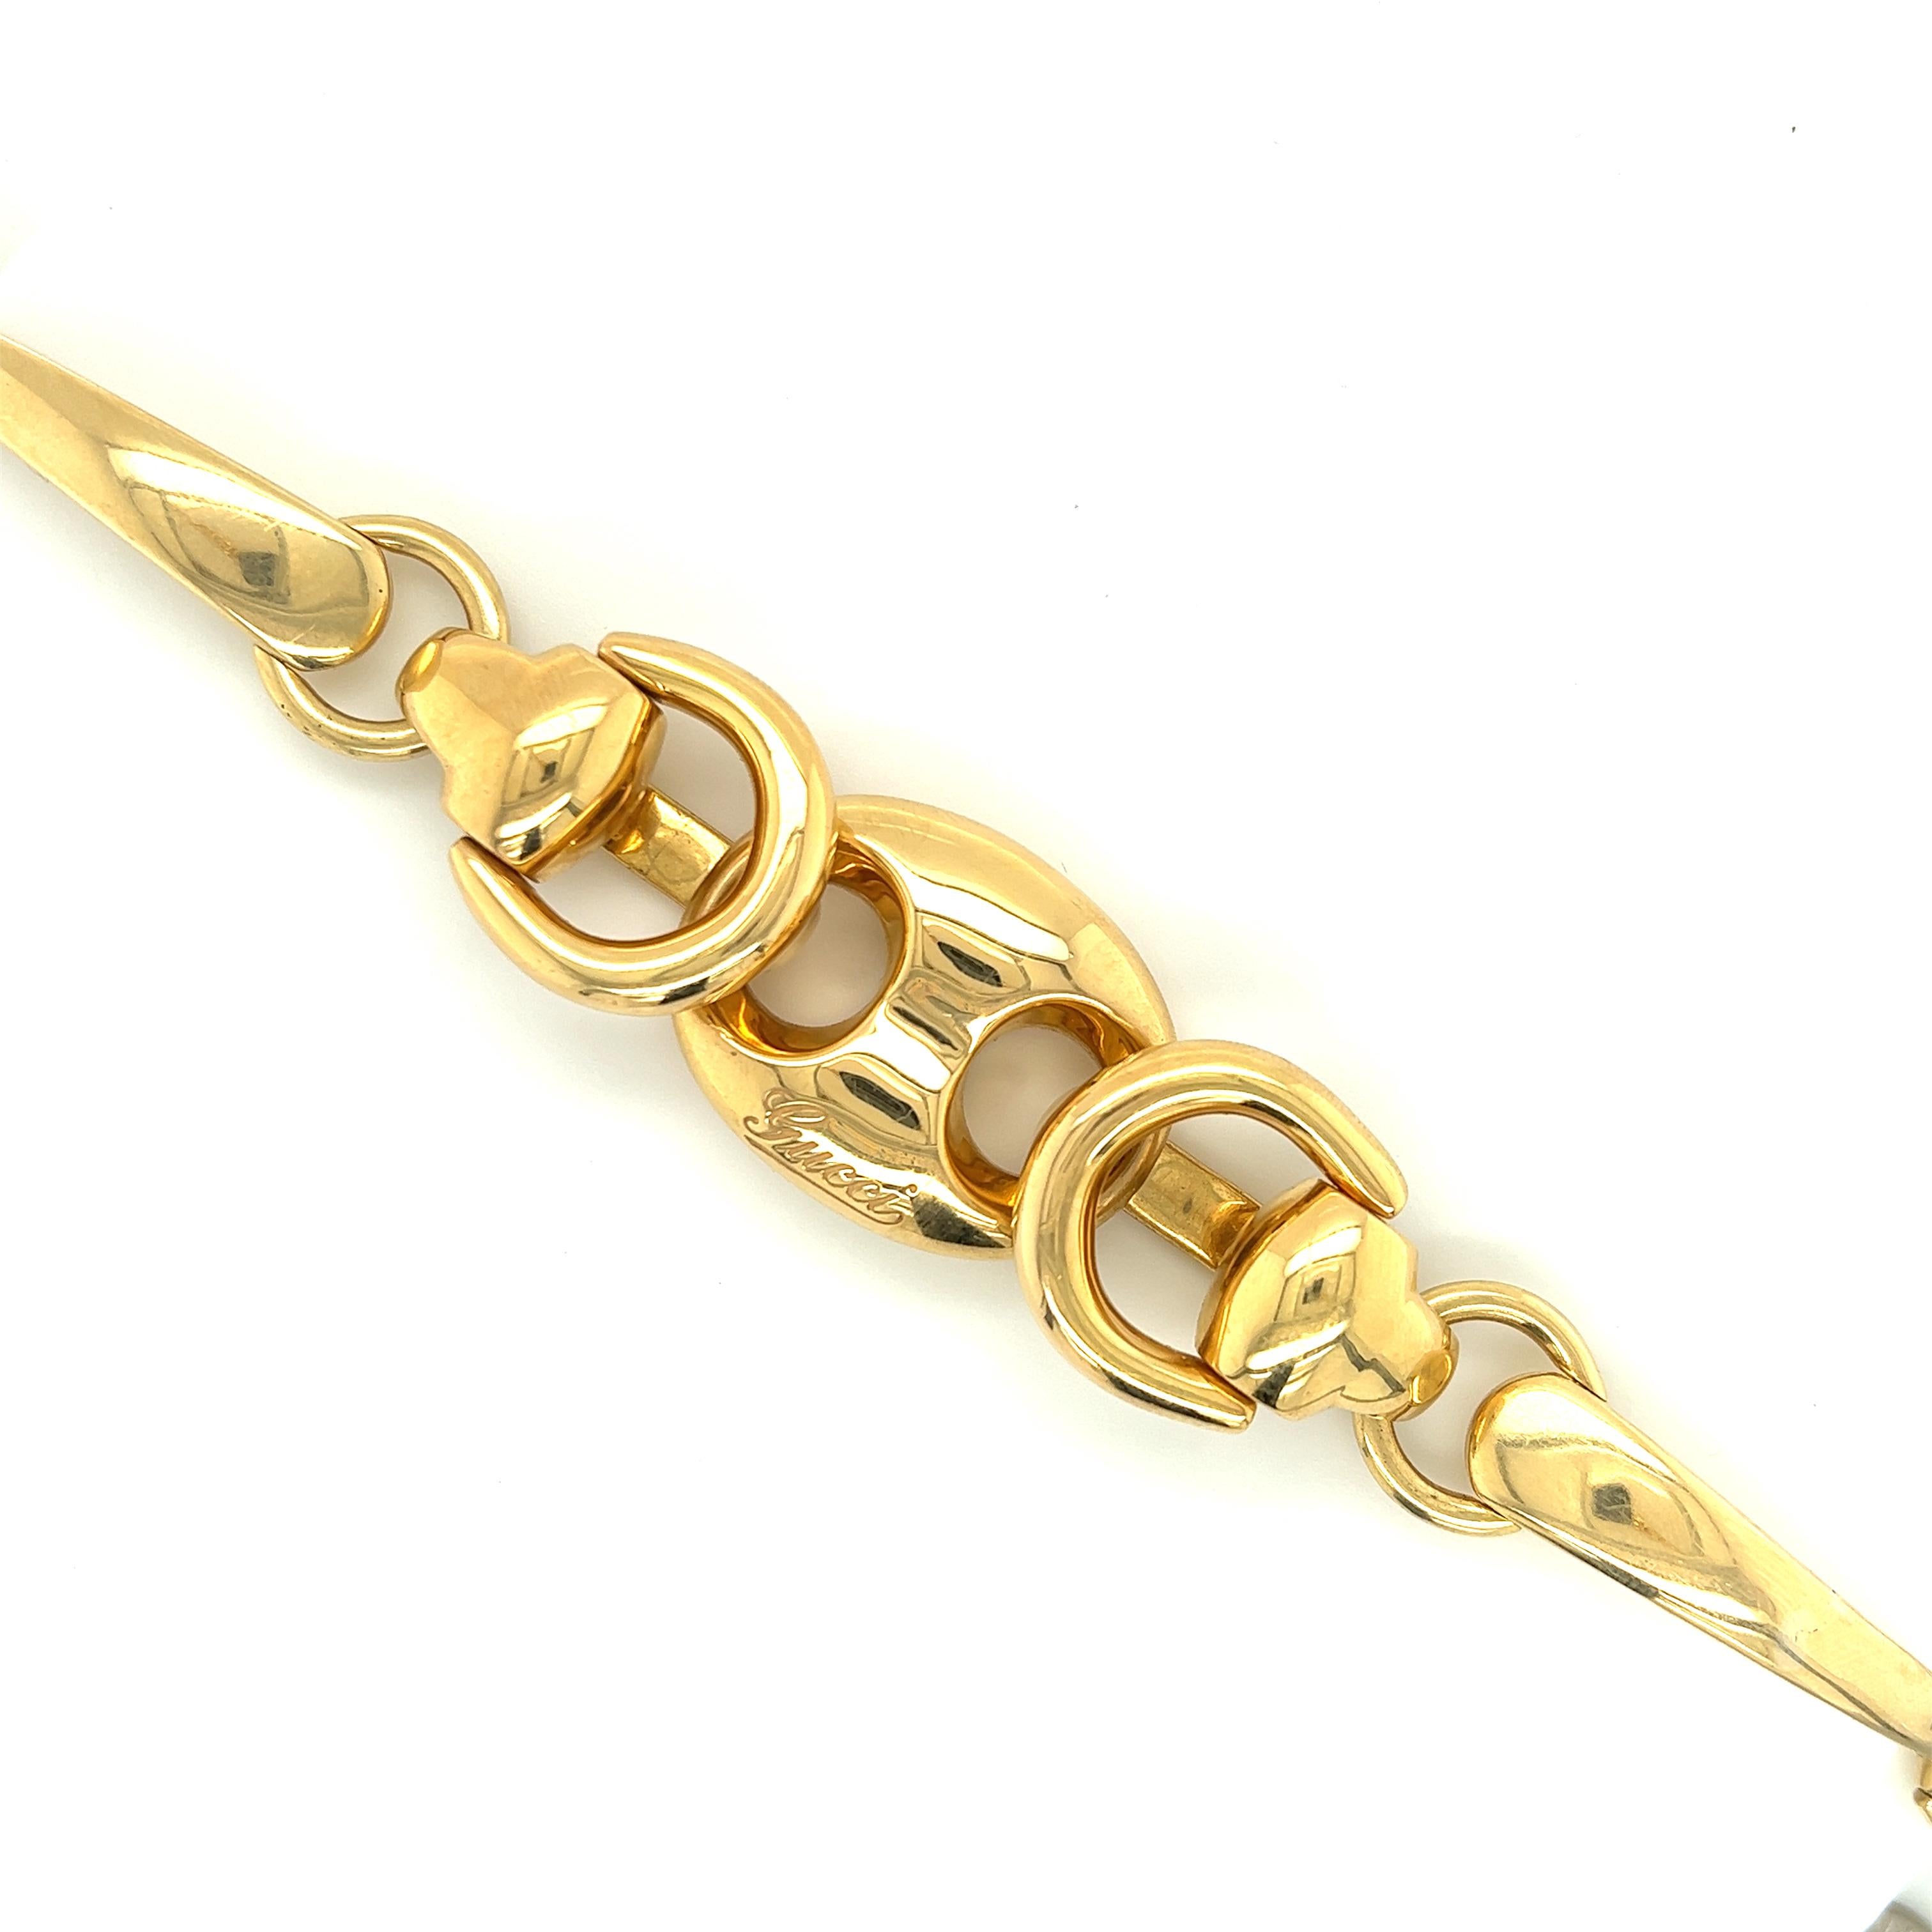 Beautiful bracelet crafted in 18k yellow gold by famed designer Gucci. 
The bracelet is known as the Horsebit Puff Link bracelet. 
The famous Gucci Puff link is centered by gold accents in a creative gold pattern. This light weight design is perfect